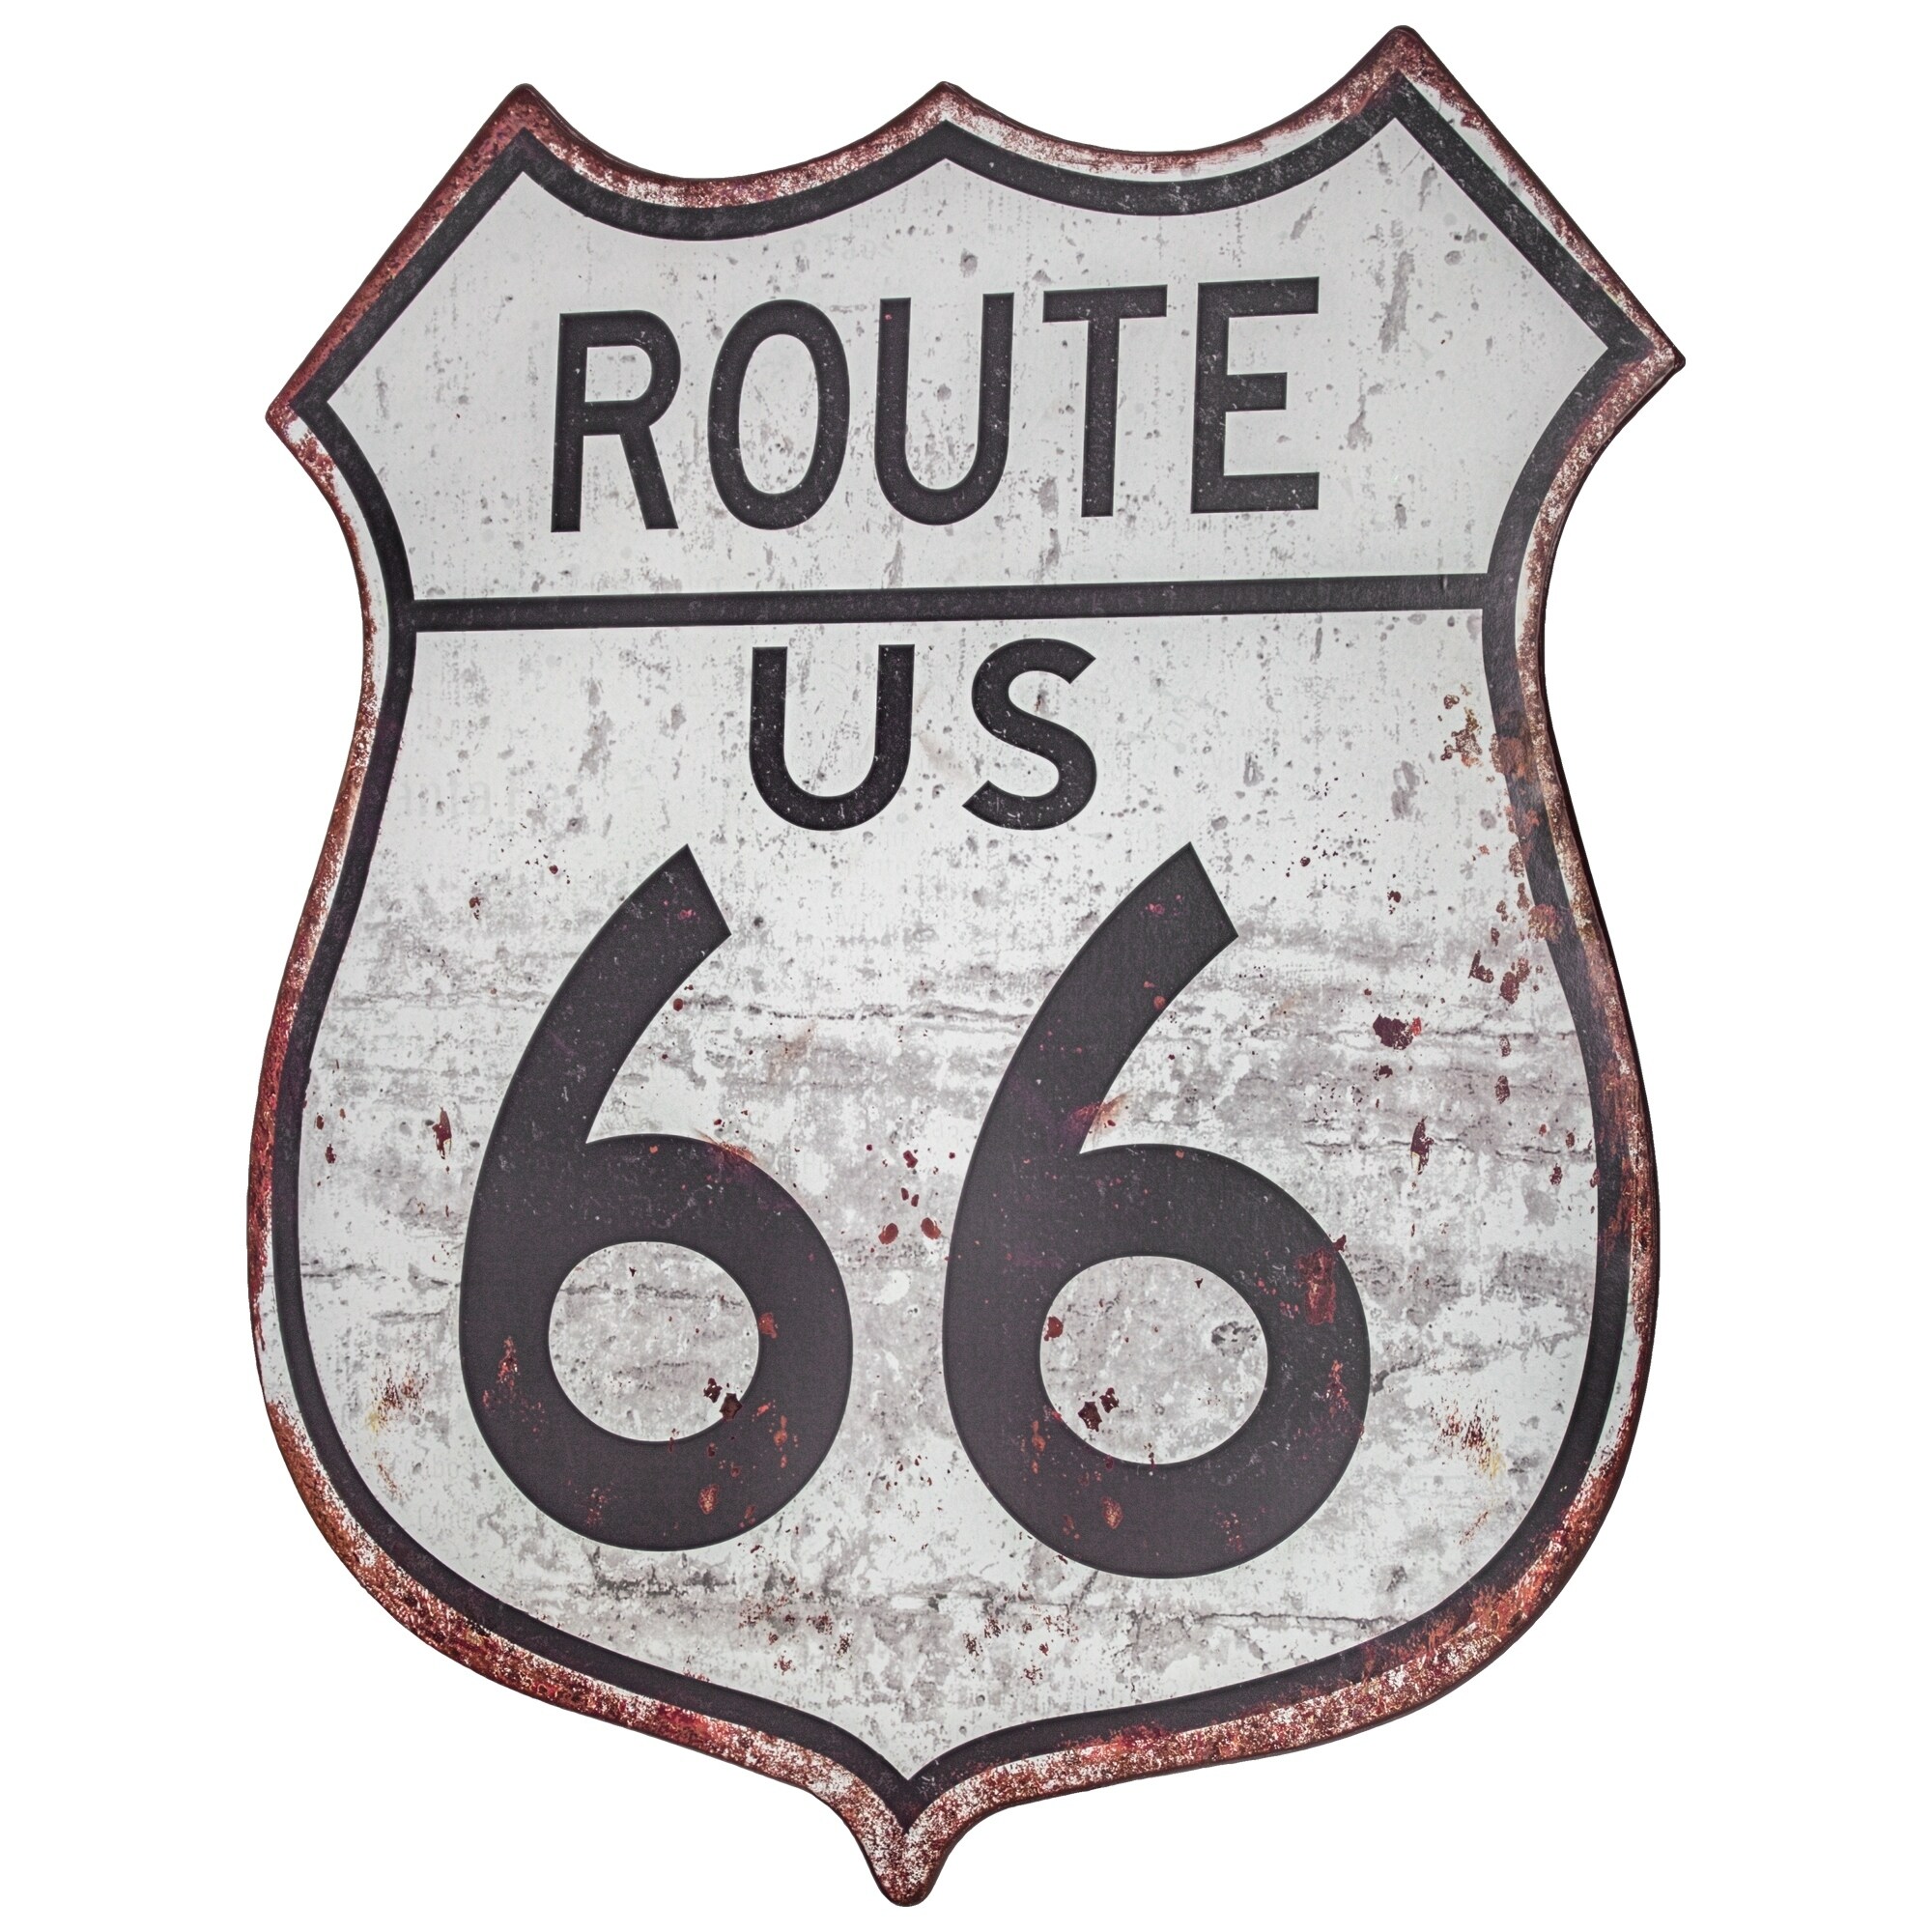 DL-Historic Route 66 Tin Sign Garage Shabby Chic Hanging Decor Metal Wall Poster 